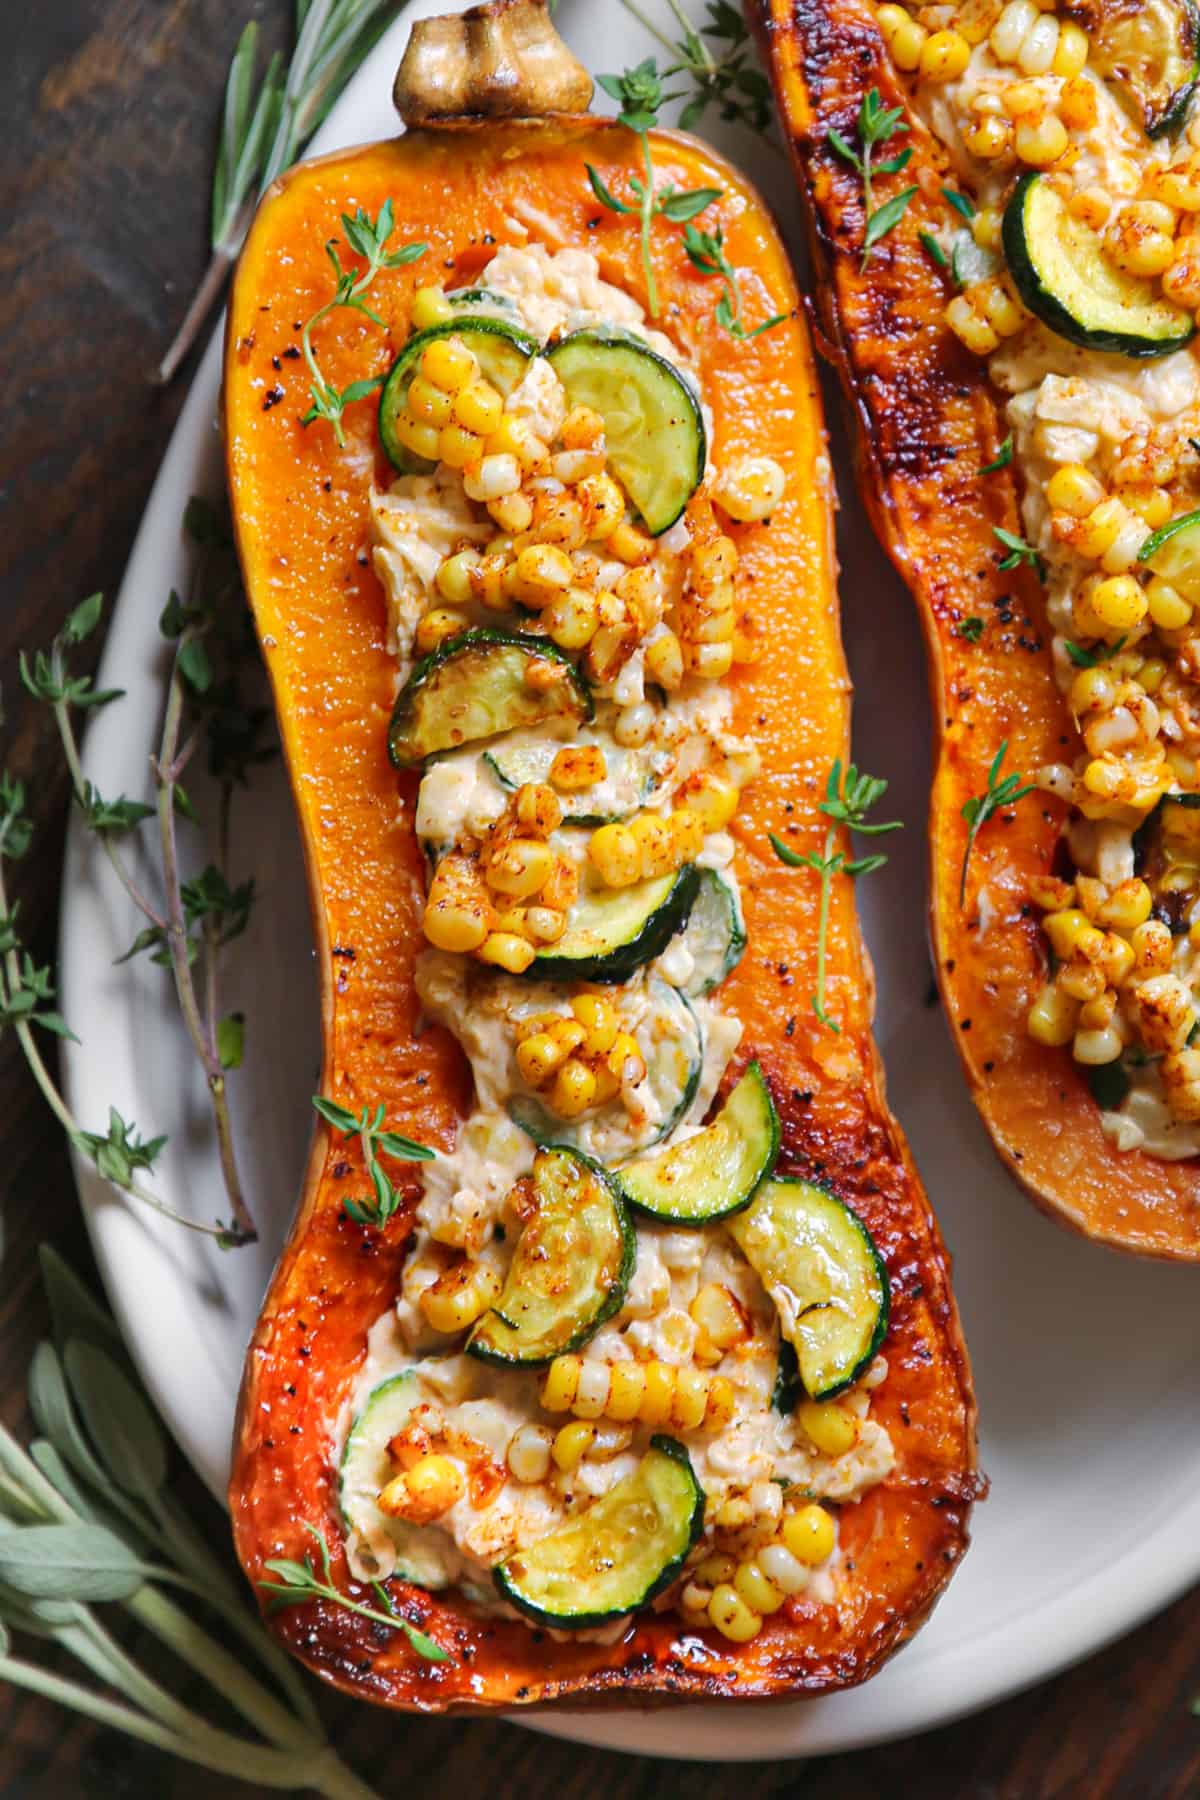 Roasted Butternut Squash Half stuffed with Corn, Zucchini, and Cheese - on a white platter.